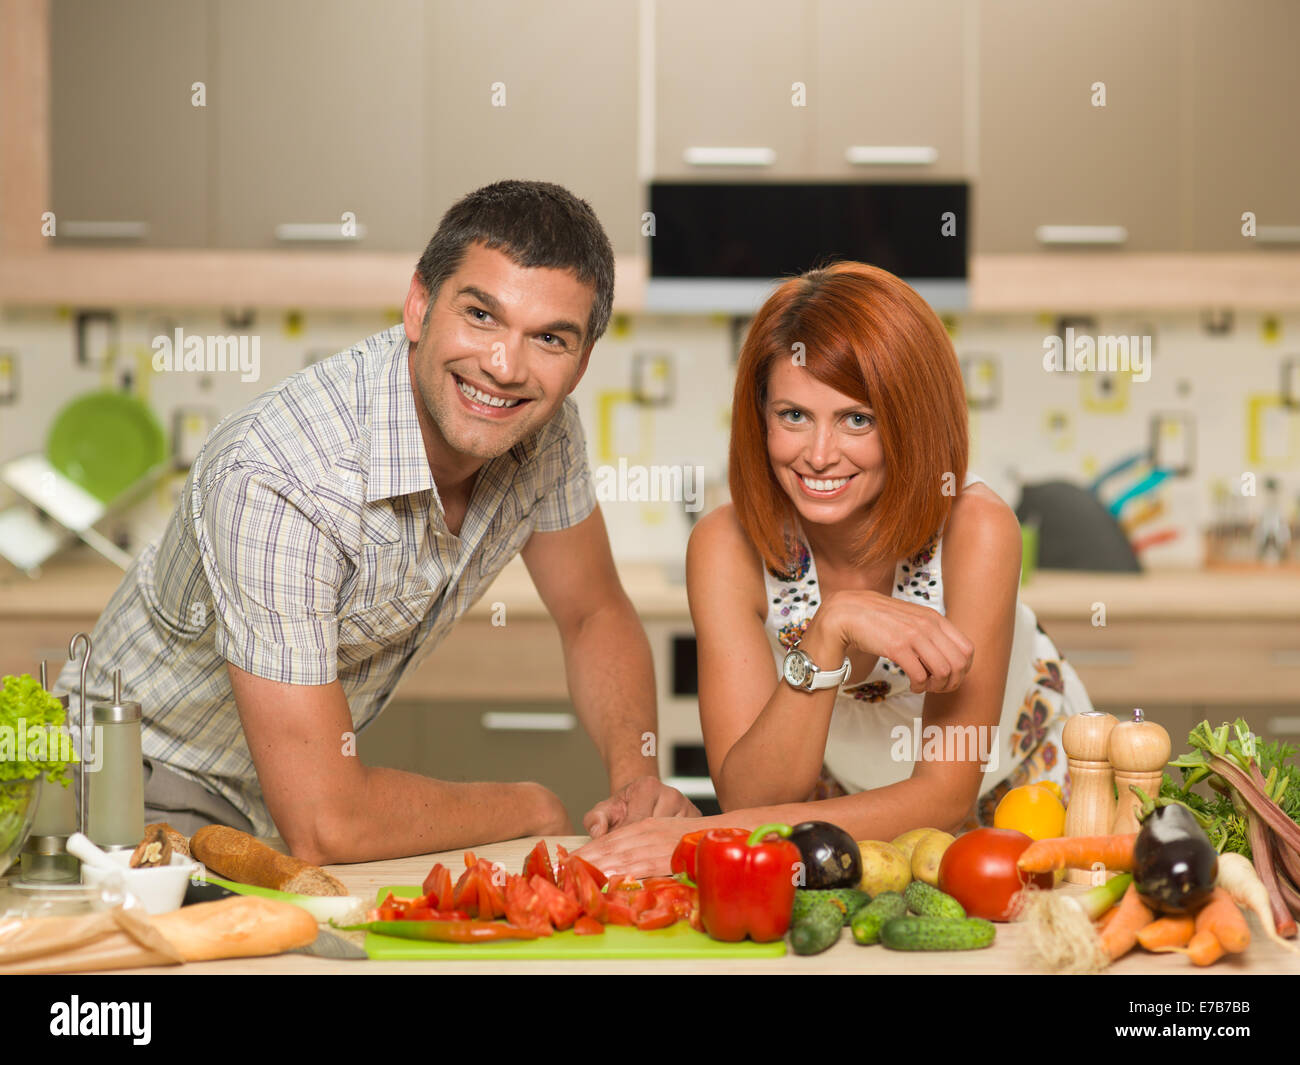 portrait of young happy couple standing in kitchen with fresh vegetables on table Stock Photo